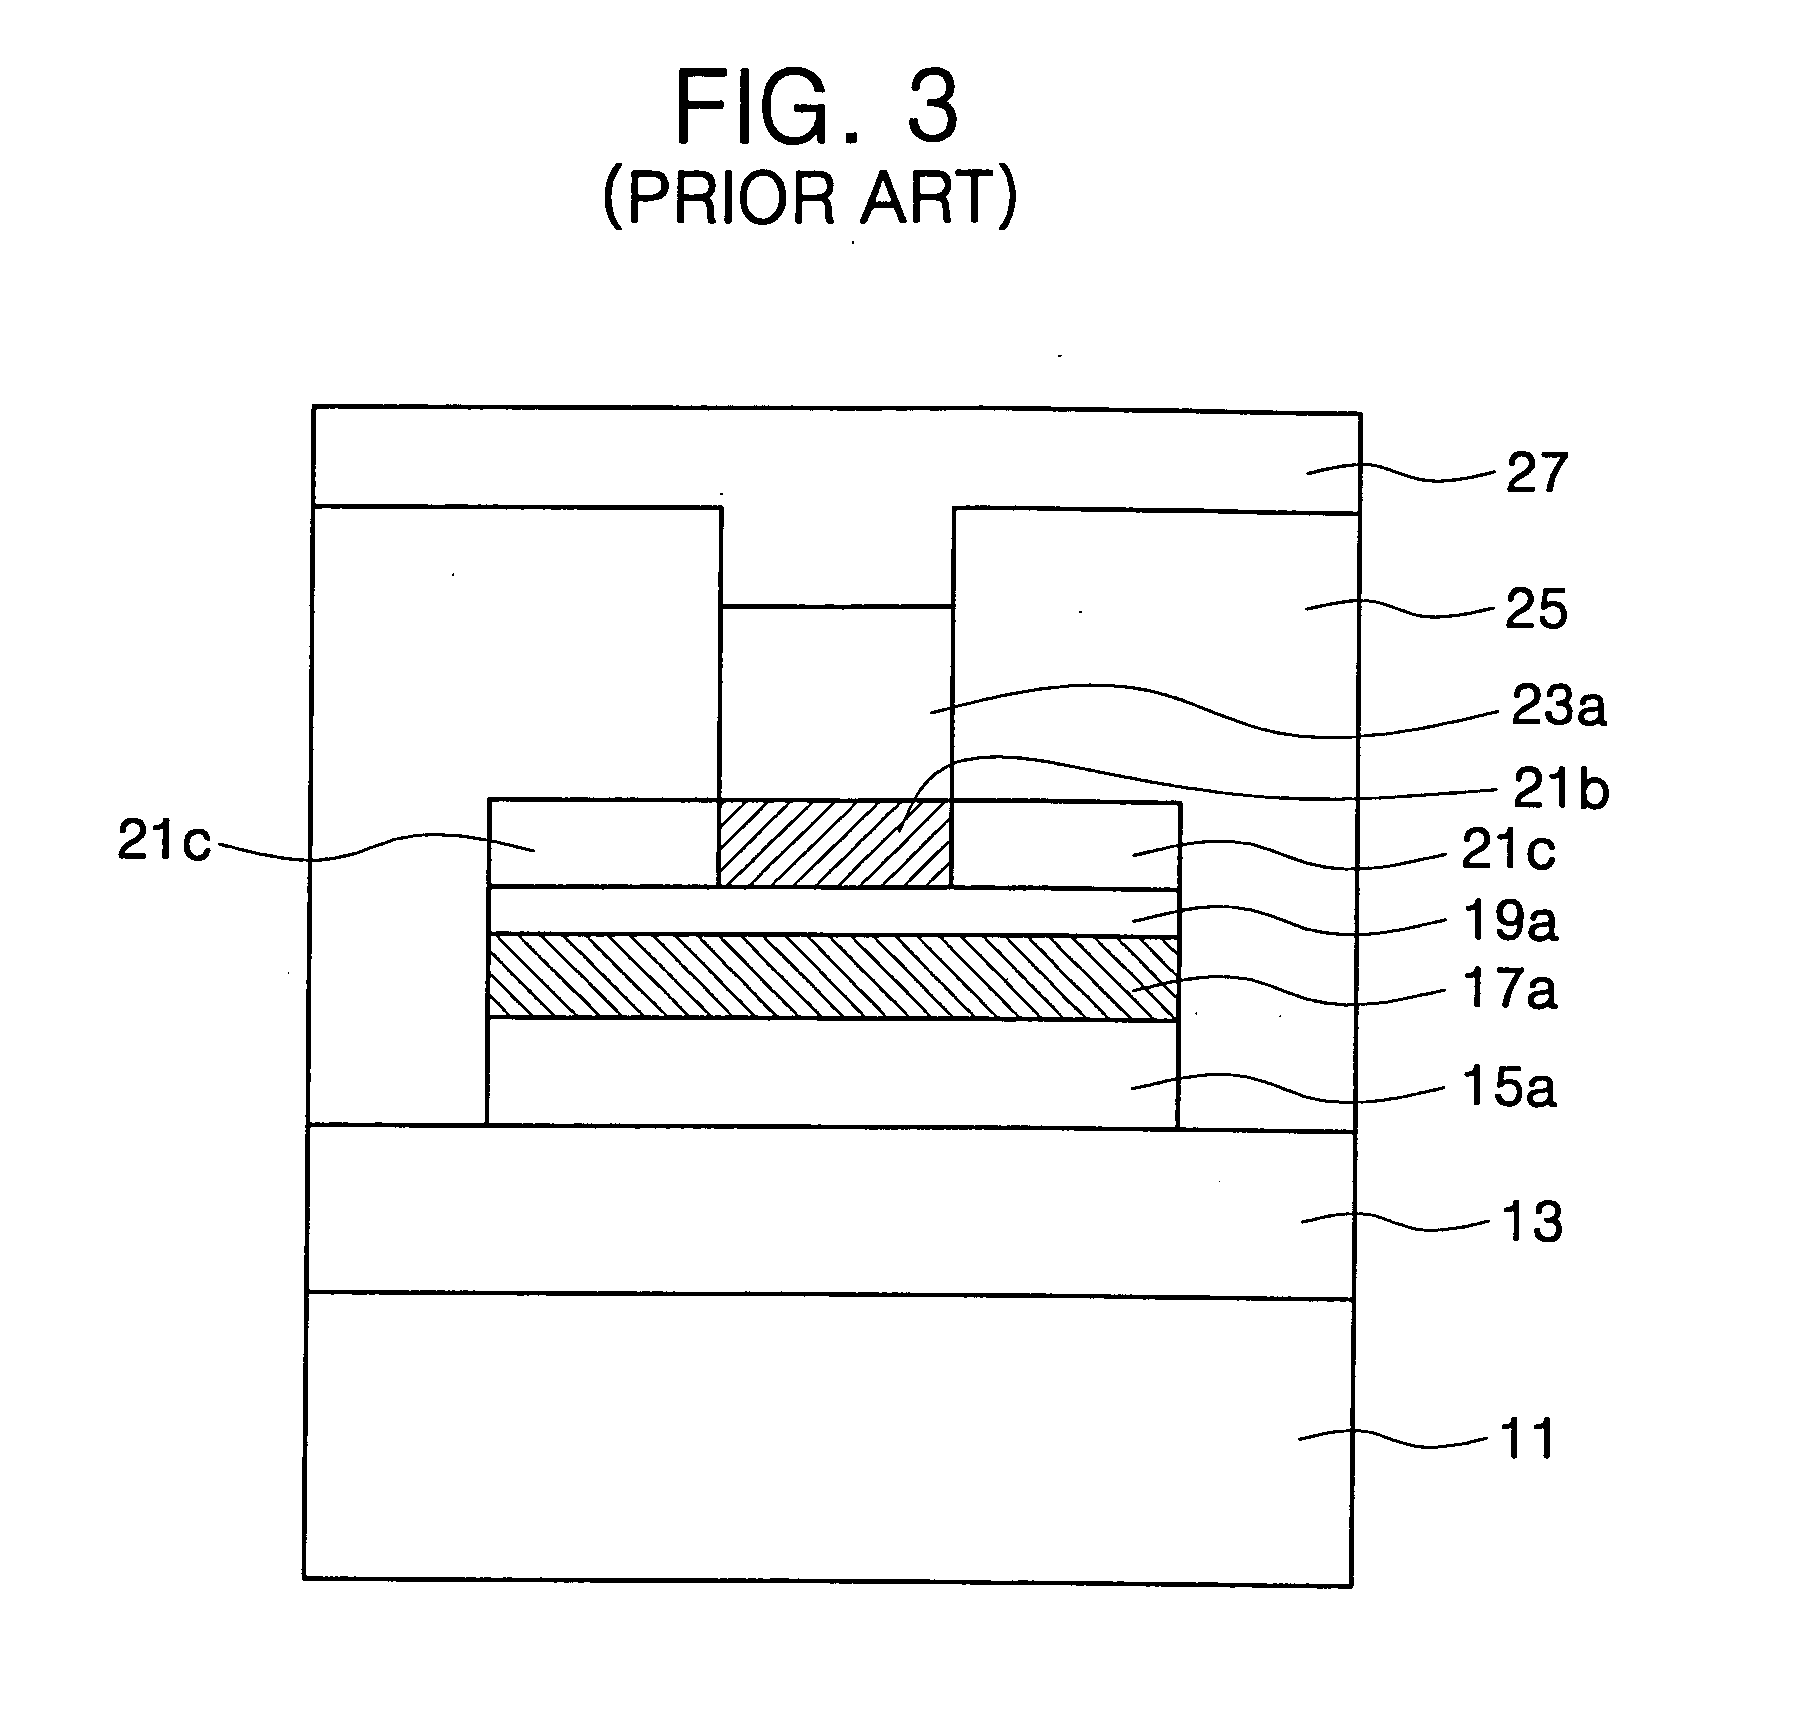 Magnetic tunnel junction structure having an oxidized buffer layer and method of fabricating the same